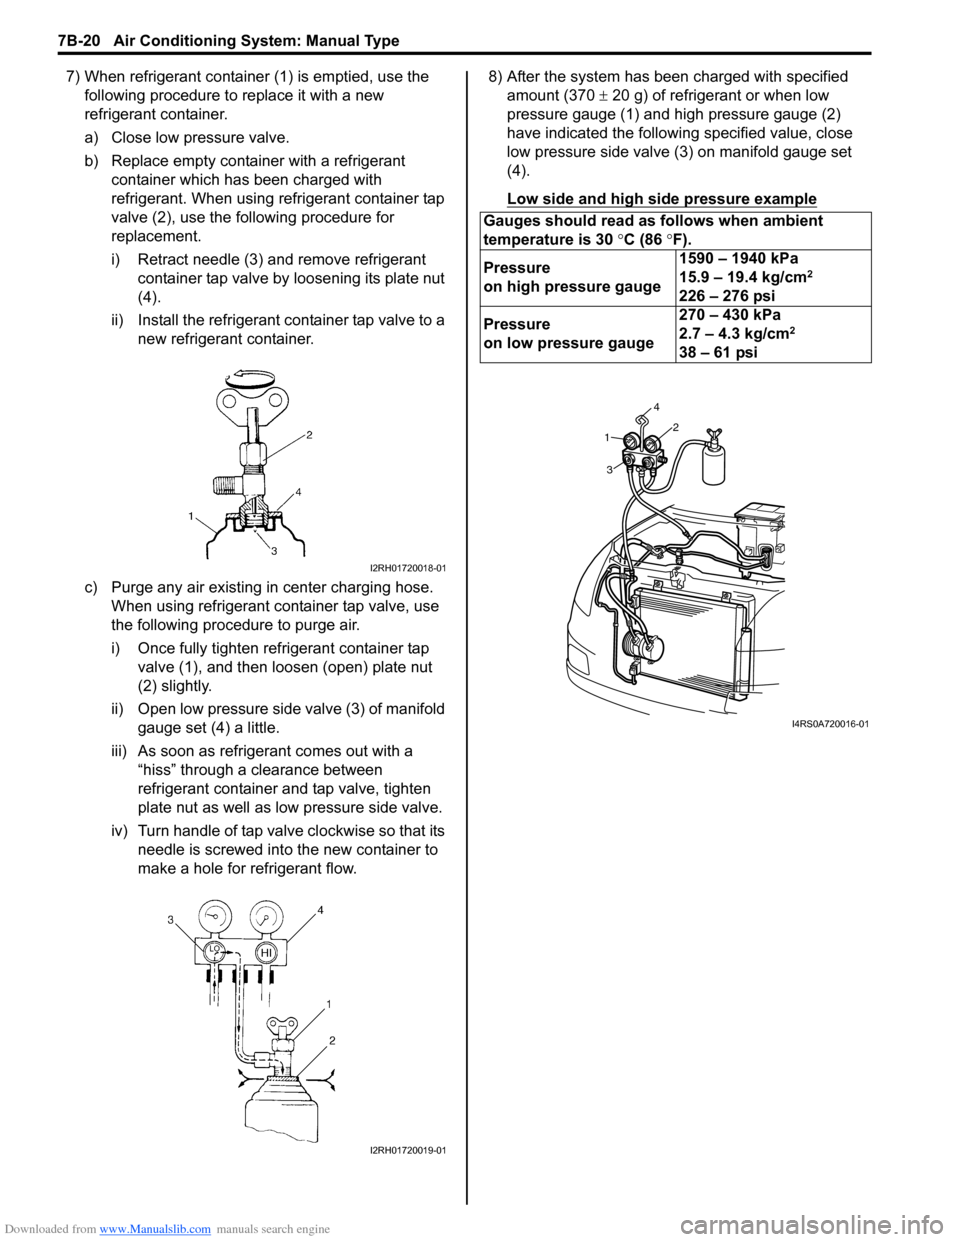 SUZUKI SWIFT 2006 2.G Service Workshop Manual Downloaded from www.Manualslib.com manuals search engine 7B-20 Air Conditioning System: Manual Type
7) When refrigerant container (1) is emptied, use the following procedure to replace it with a new 
